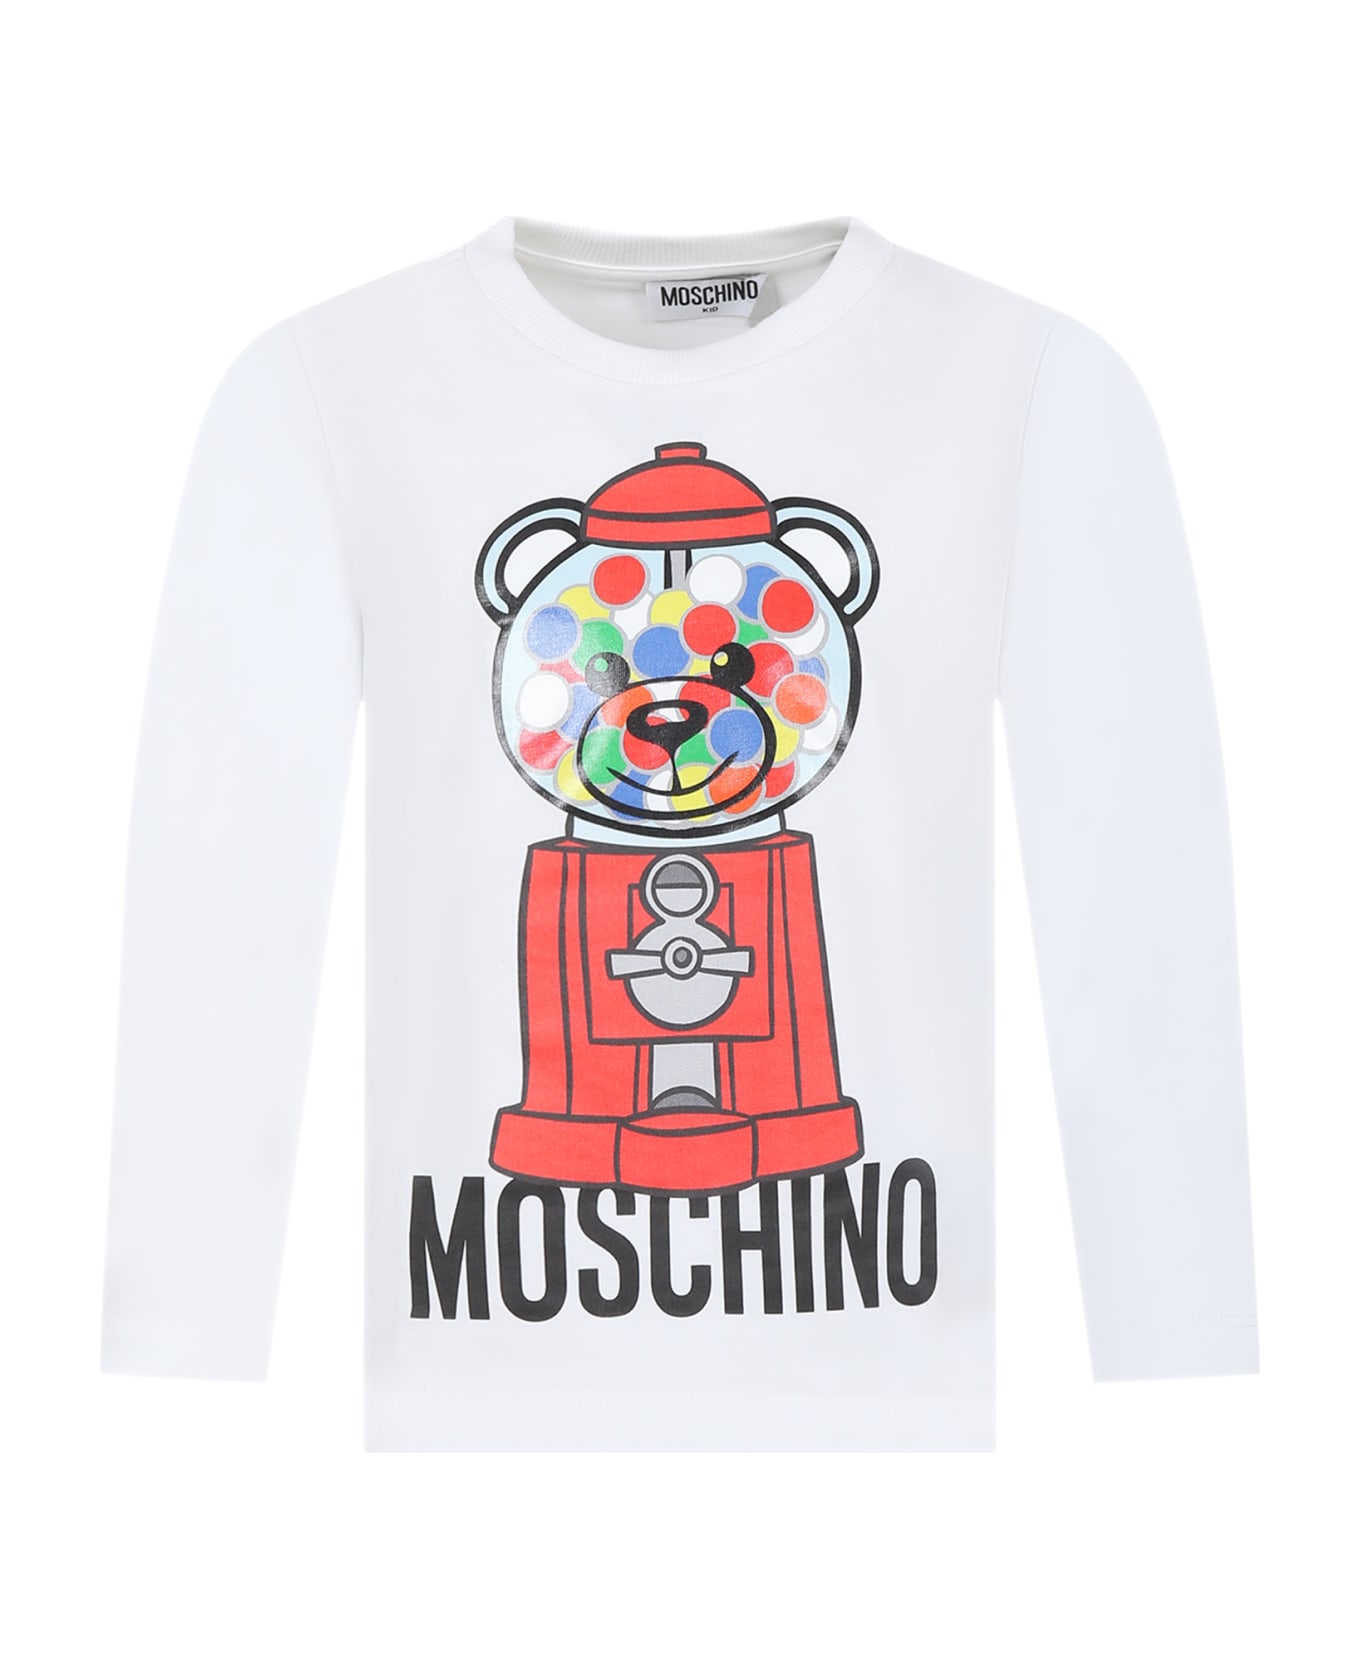 Moschino White T-shirt For Girl With Teddy Bear And Logo - White